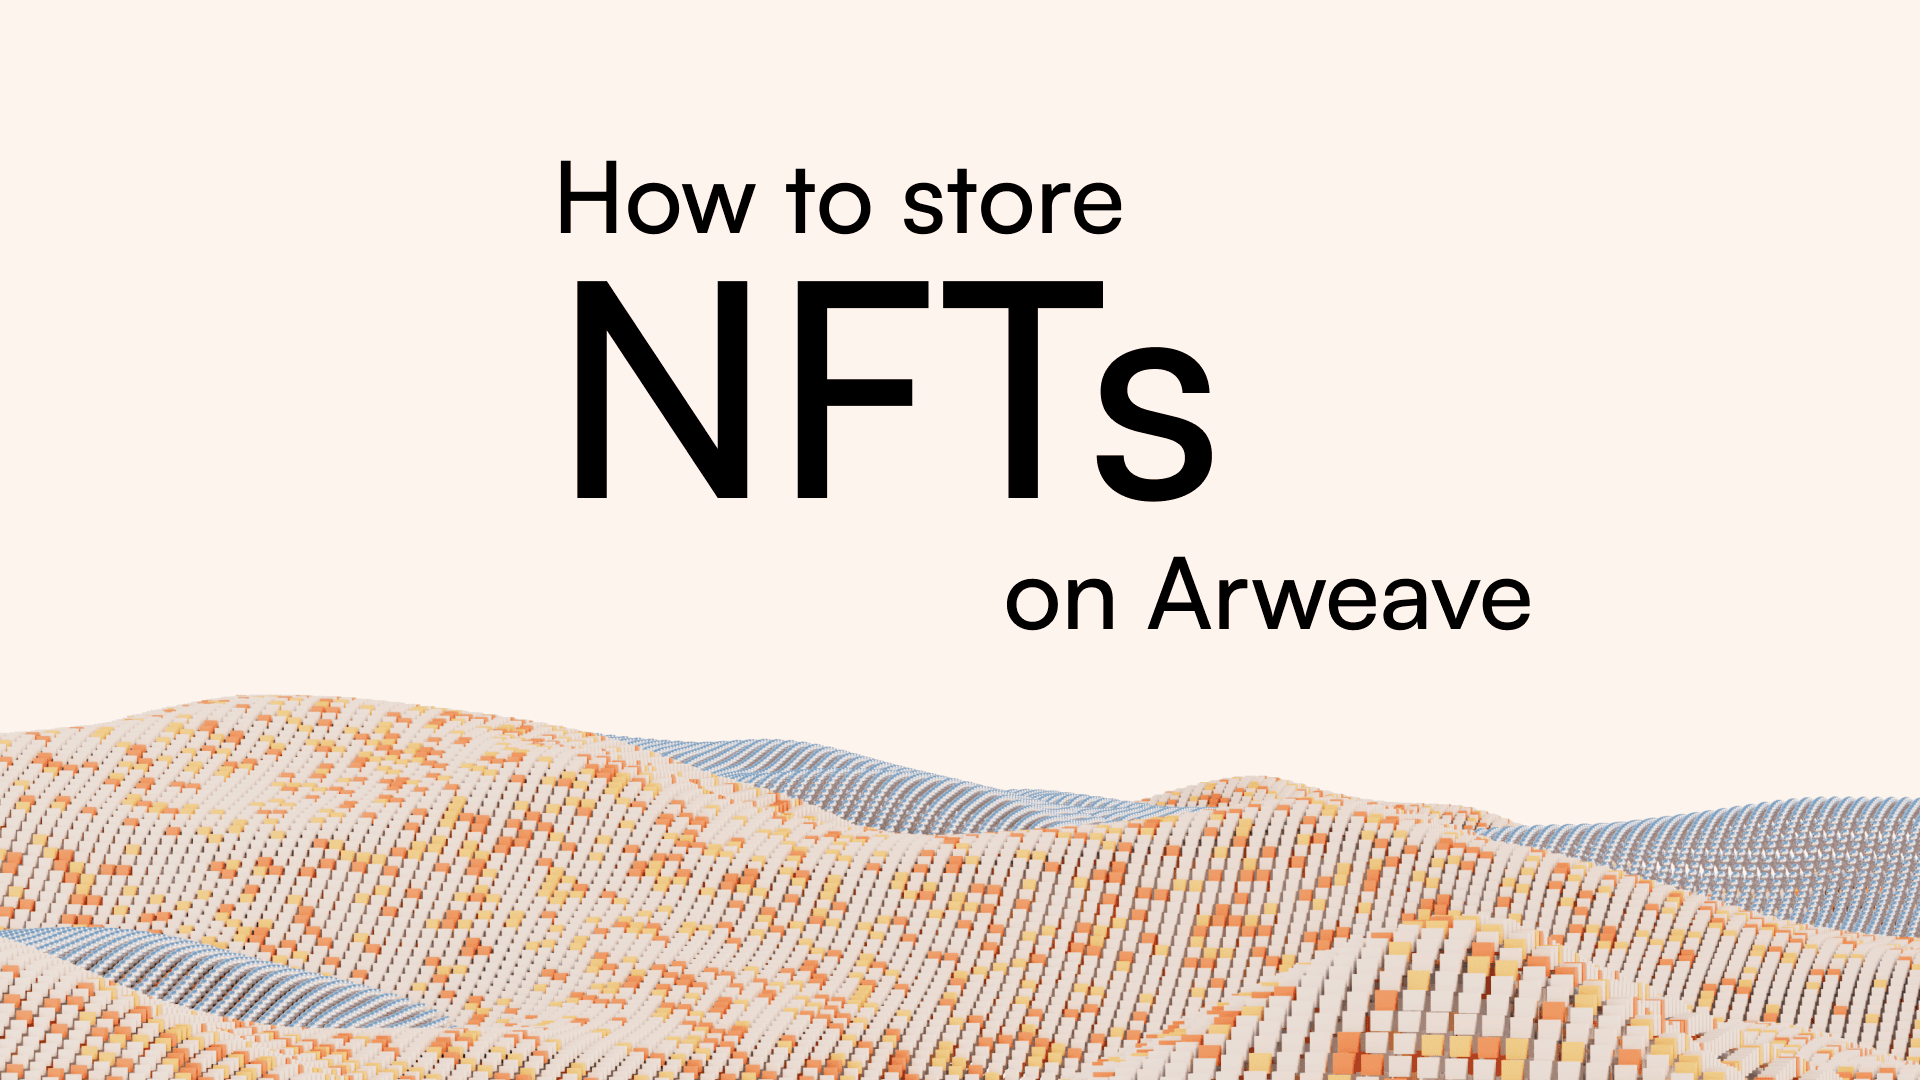 How to store NFTs on Arweave